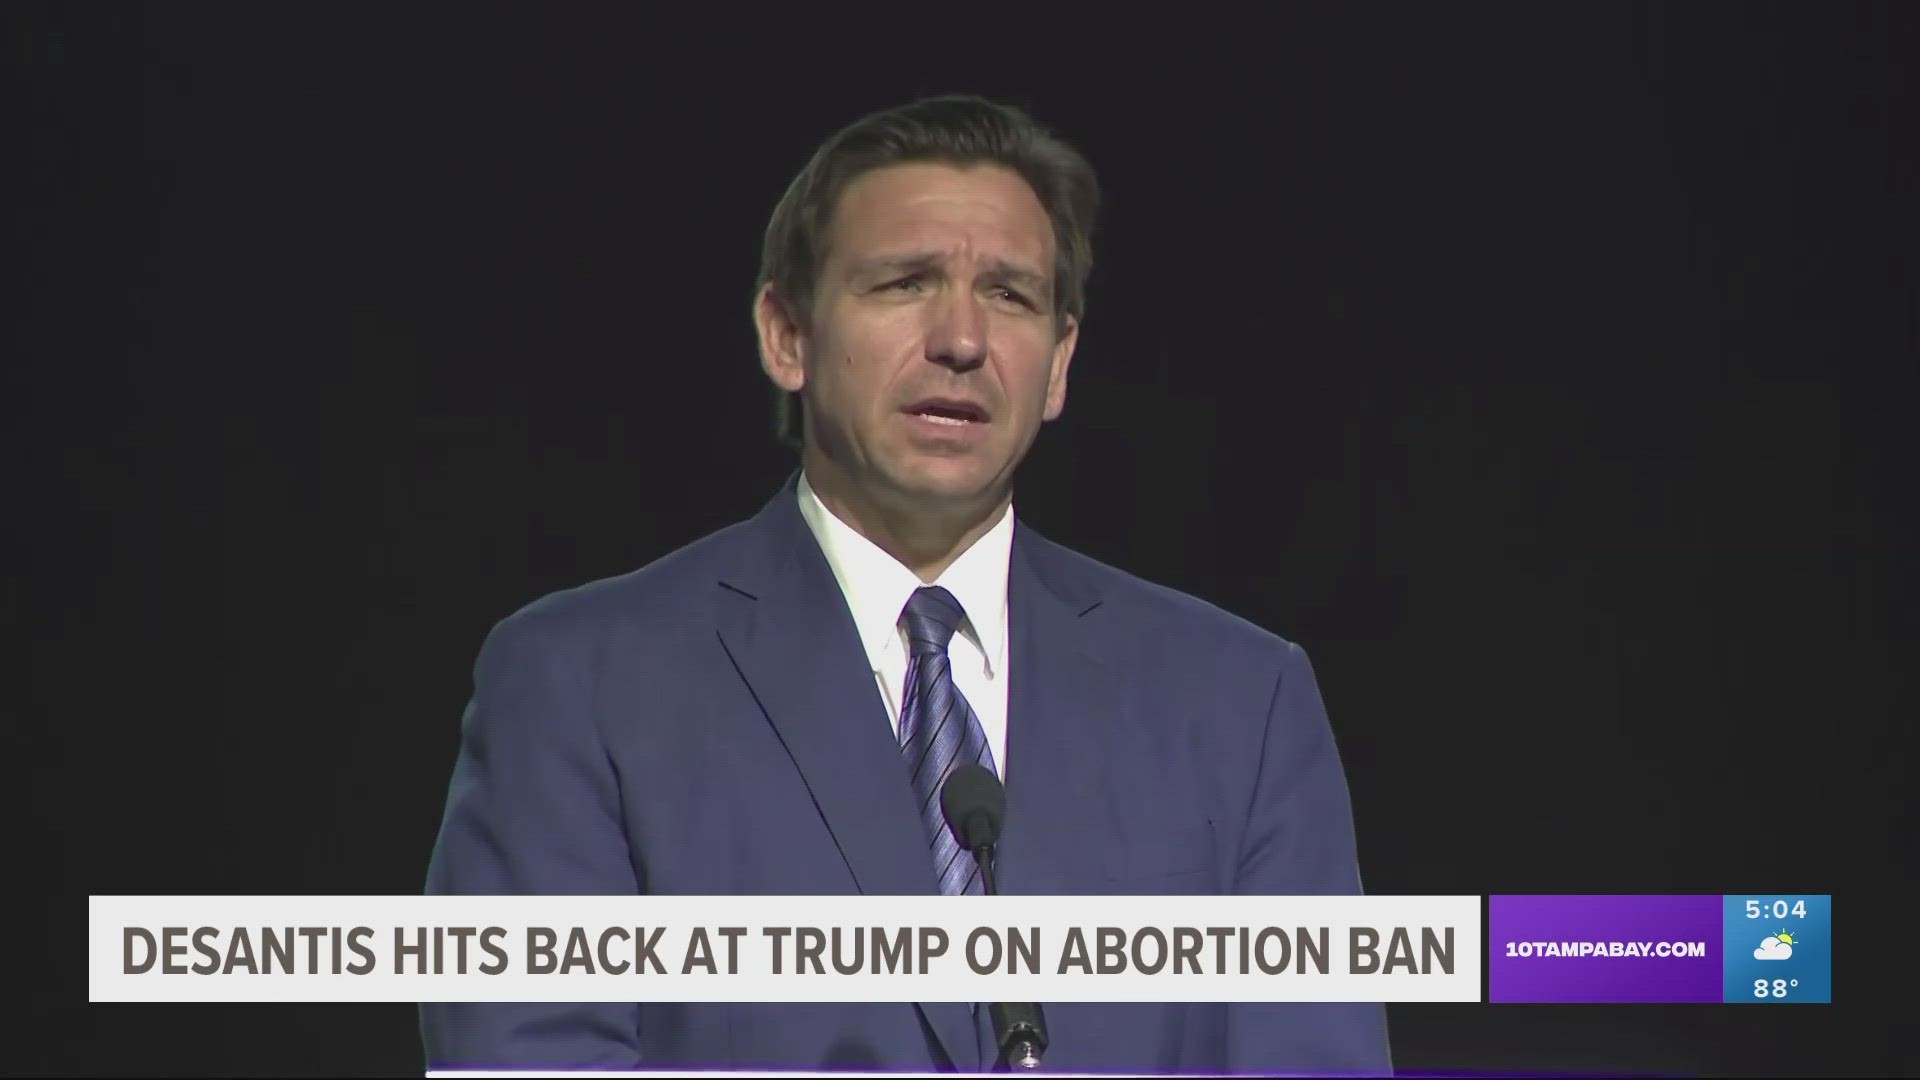 Gov. Ron DeSantis said he was proud to sign the "Heartbeat" bill while claiming former President Donald Trump won't say whether he would or would not.